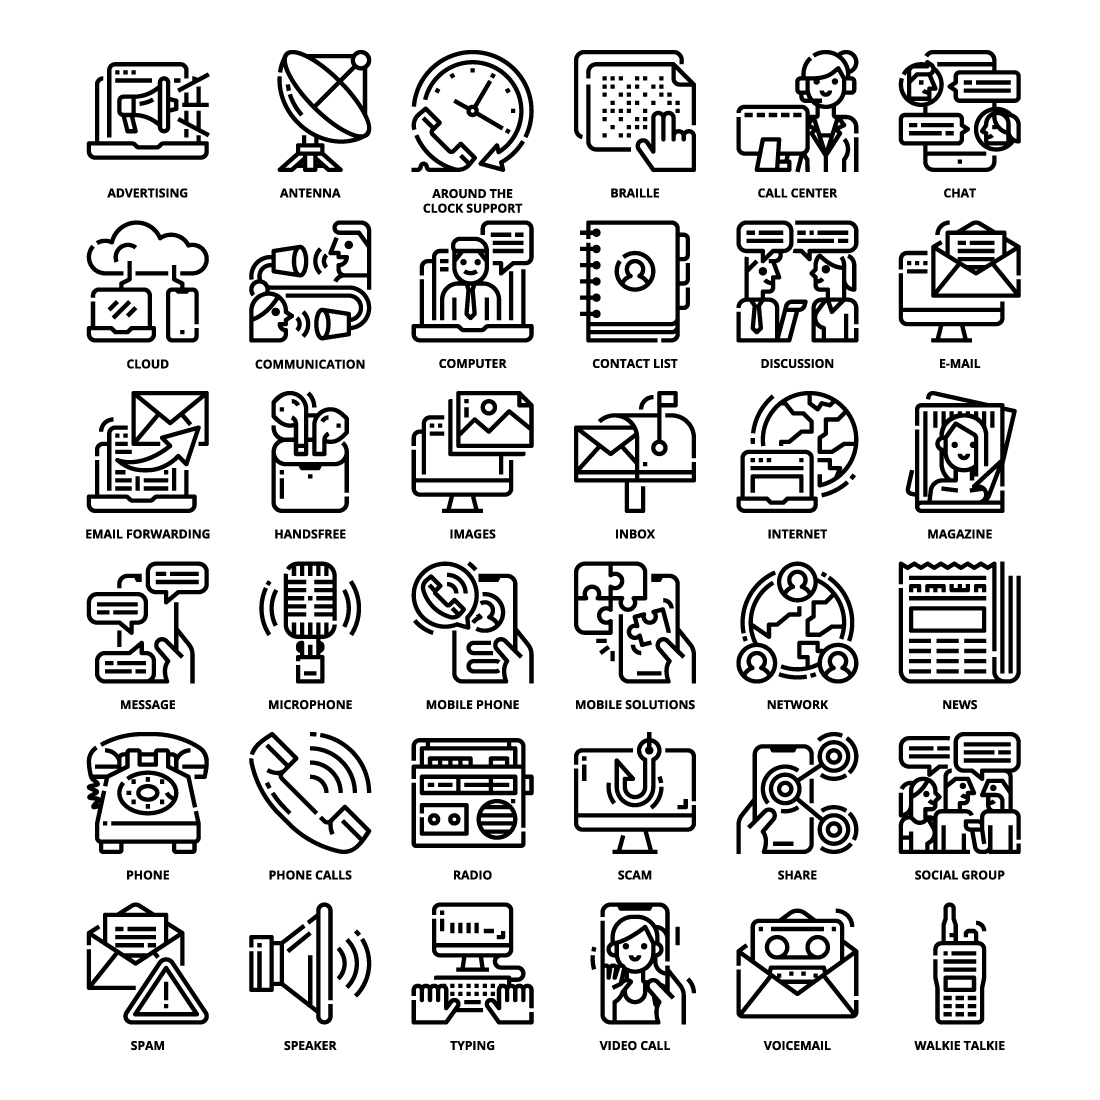 36 Communications Icons Set x 4 Styles preview image.